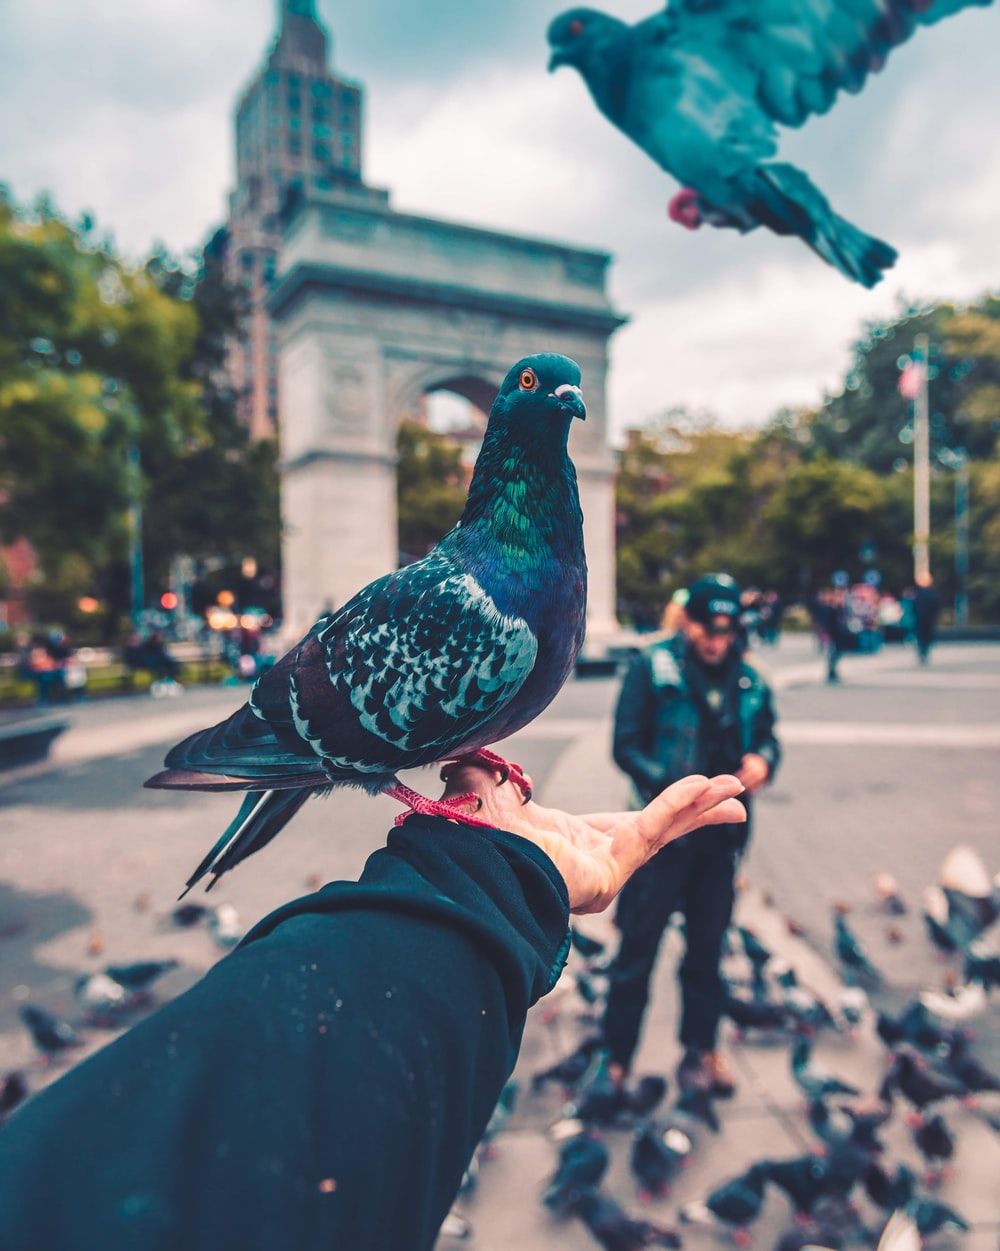 pigeon bird standing on person's hand photo